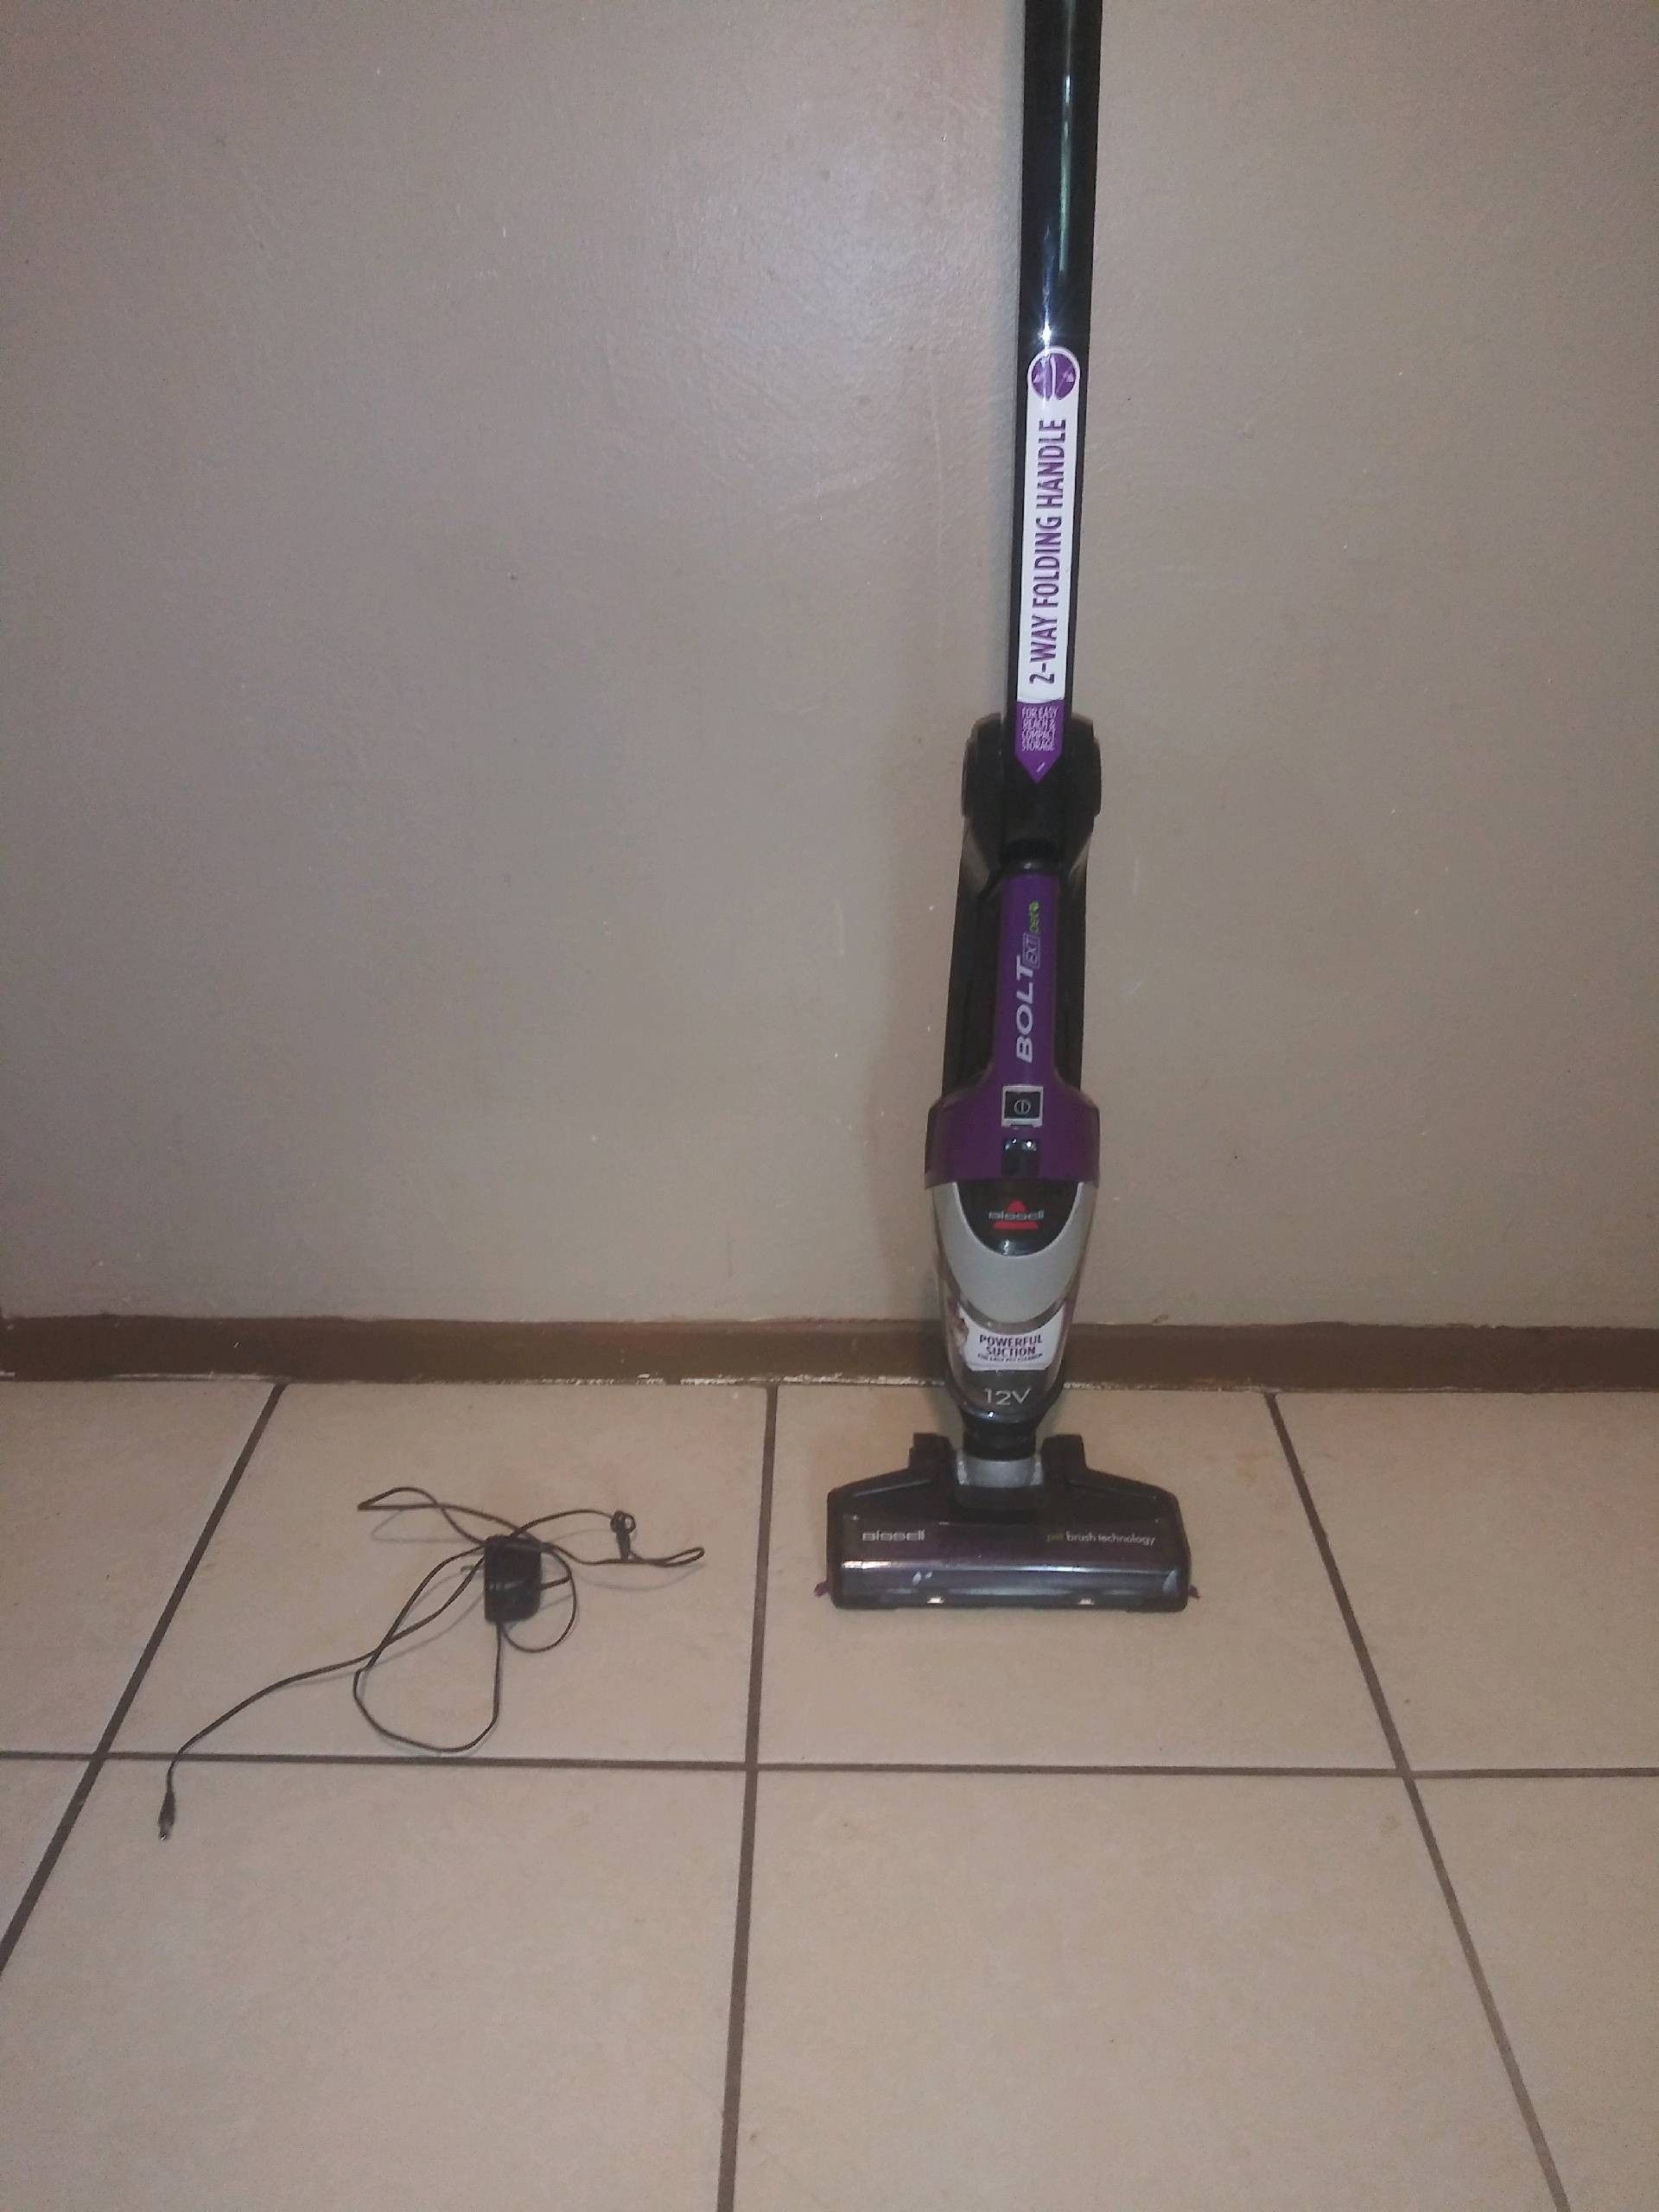 Vacuum cleaner and hand vac